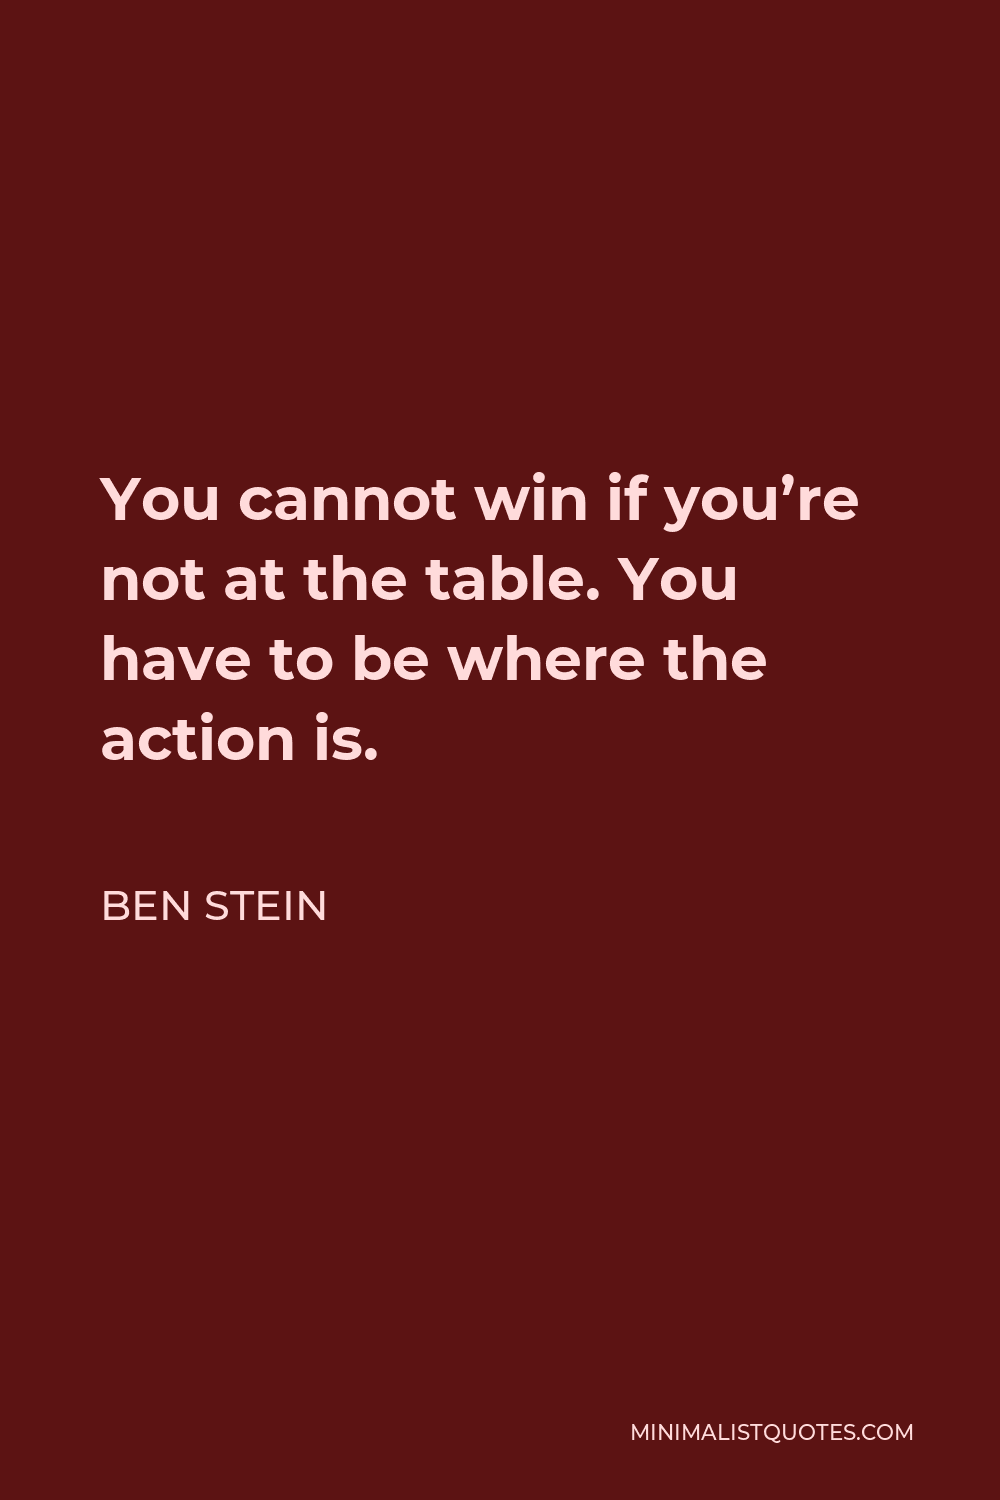 Ben Stein Quote - You cannot win if you’re not at the table. You have to be where the action is.